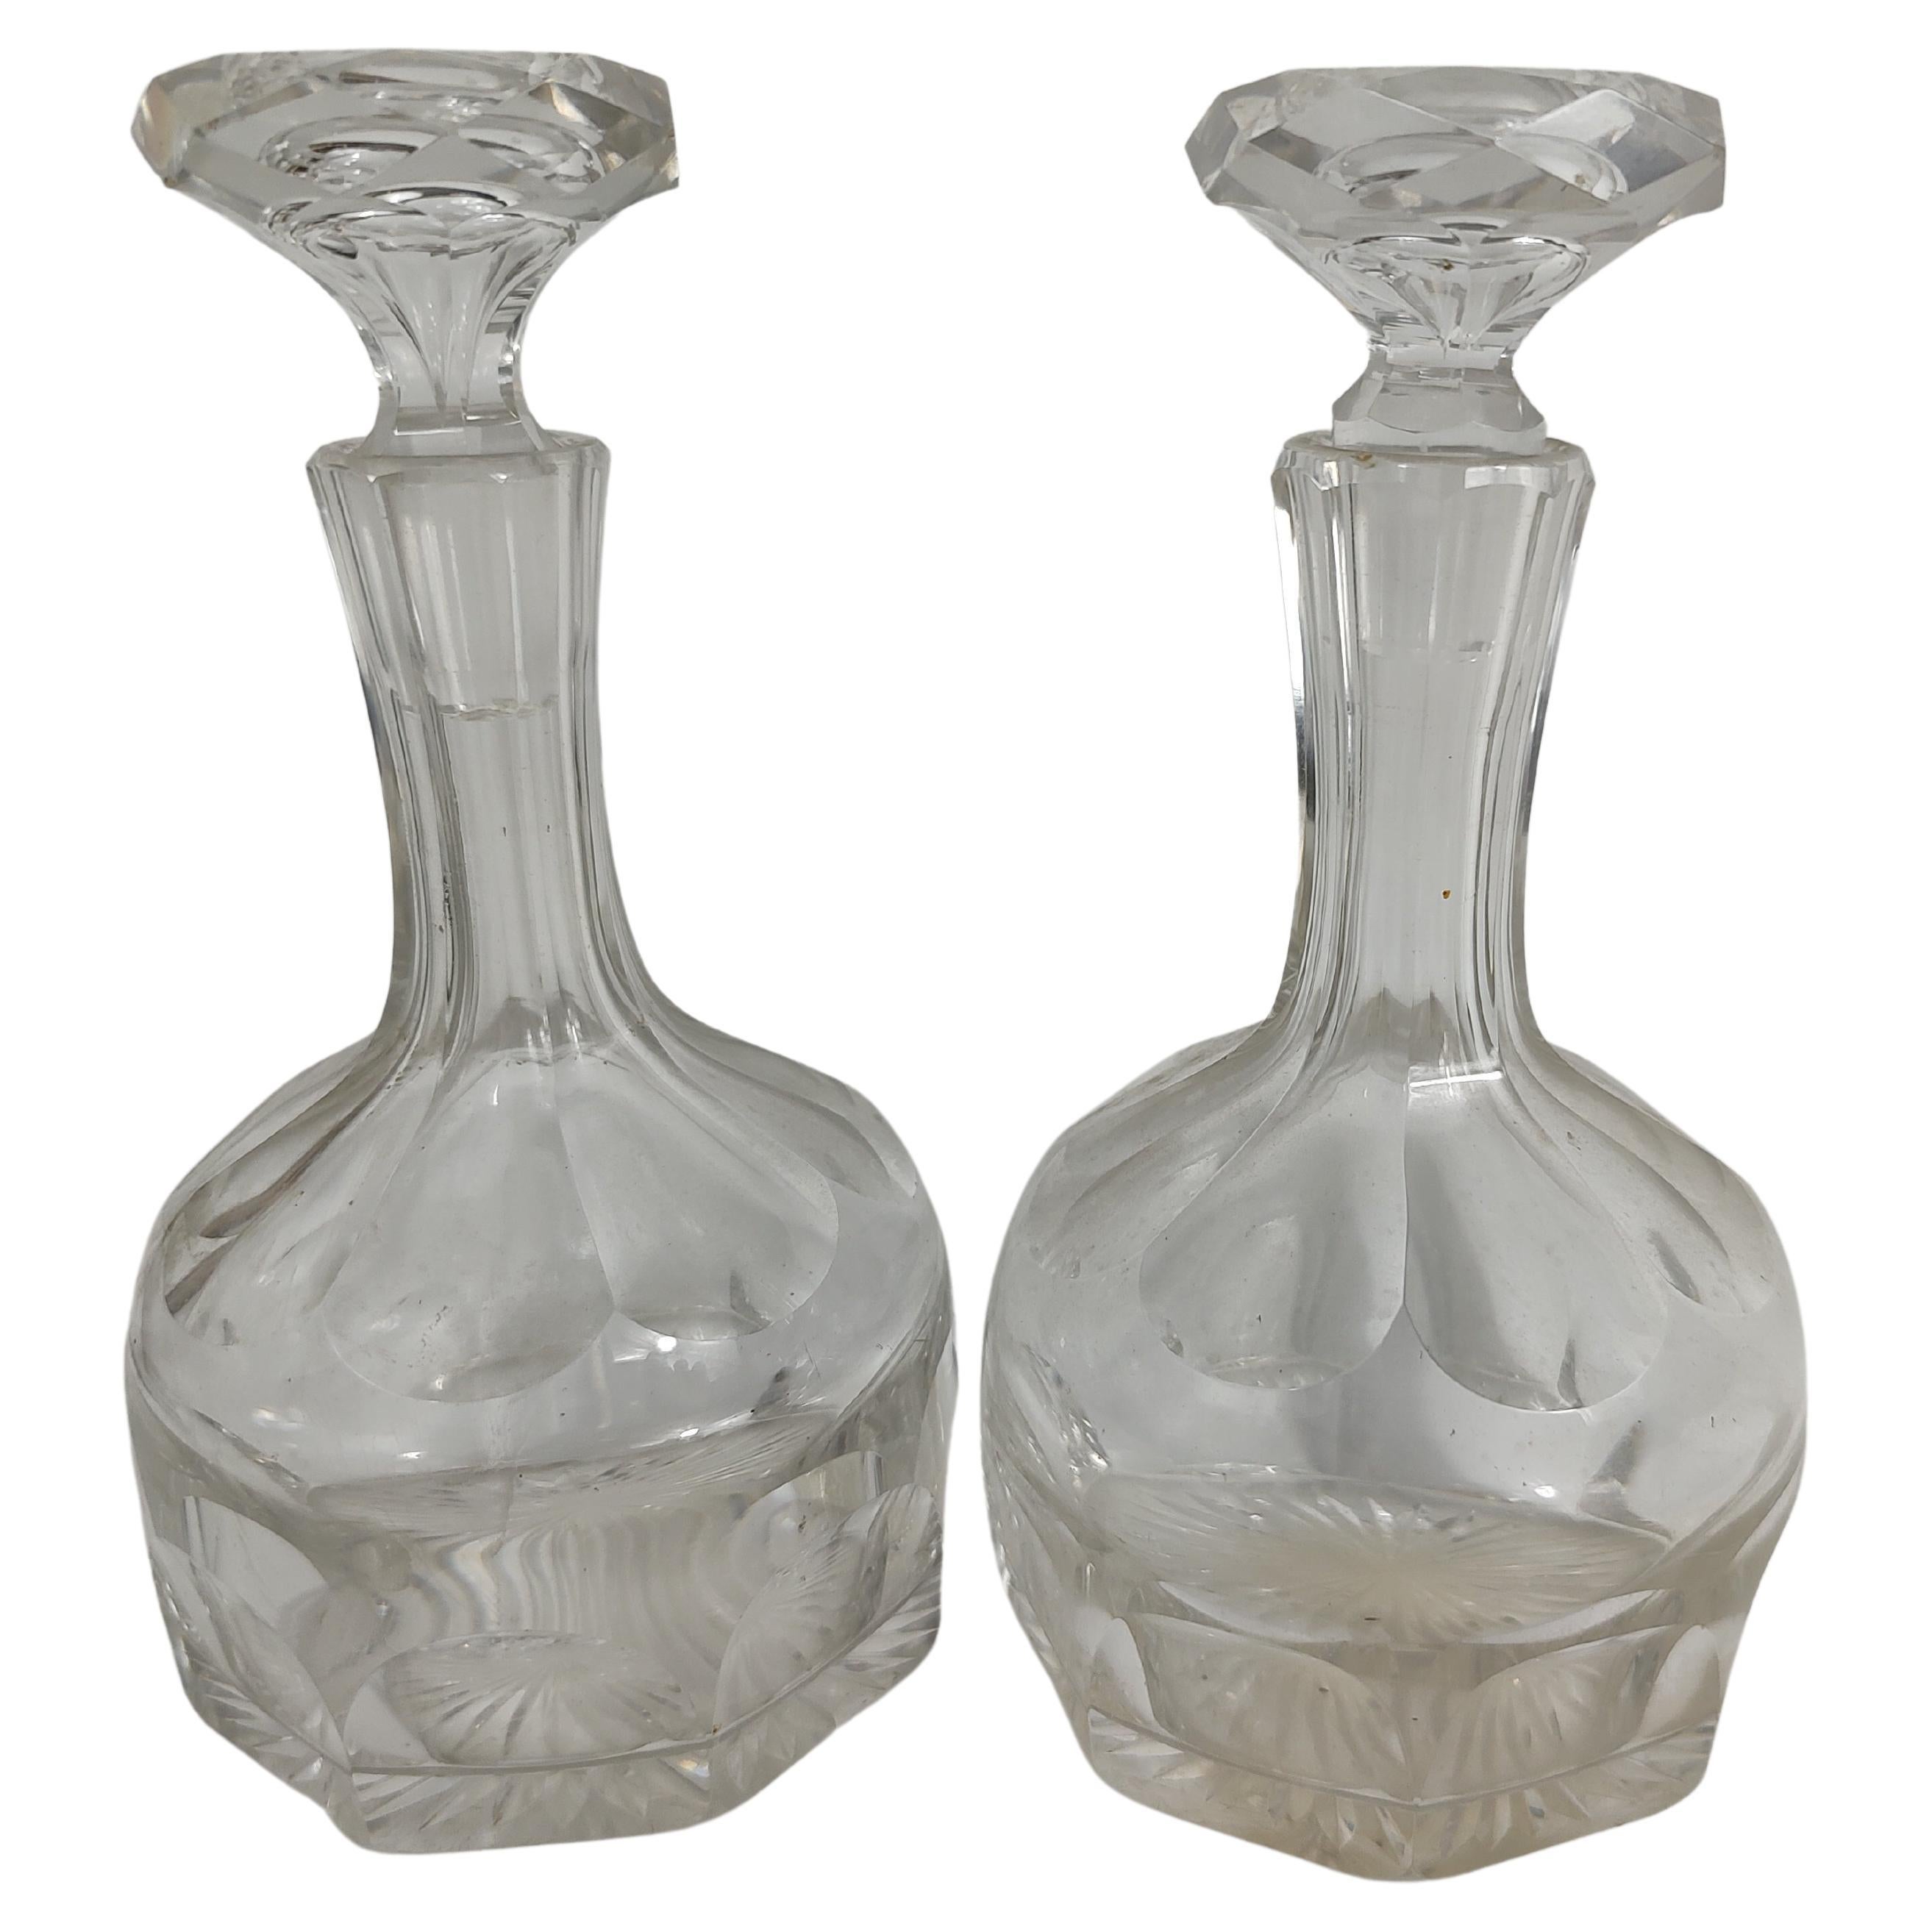 Pair of Petite Cut Glass Crystal Decanters, C1930